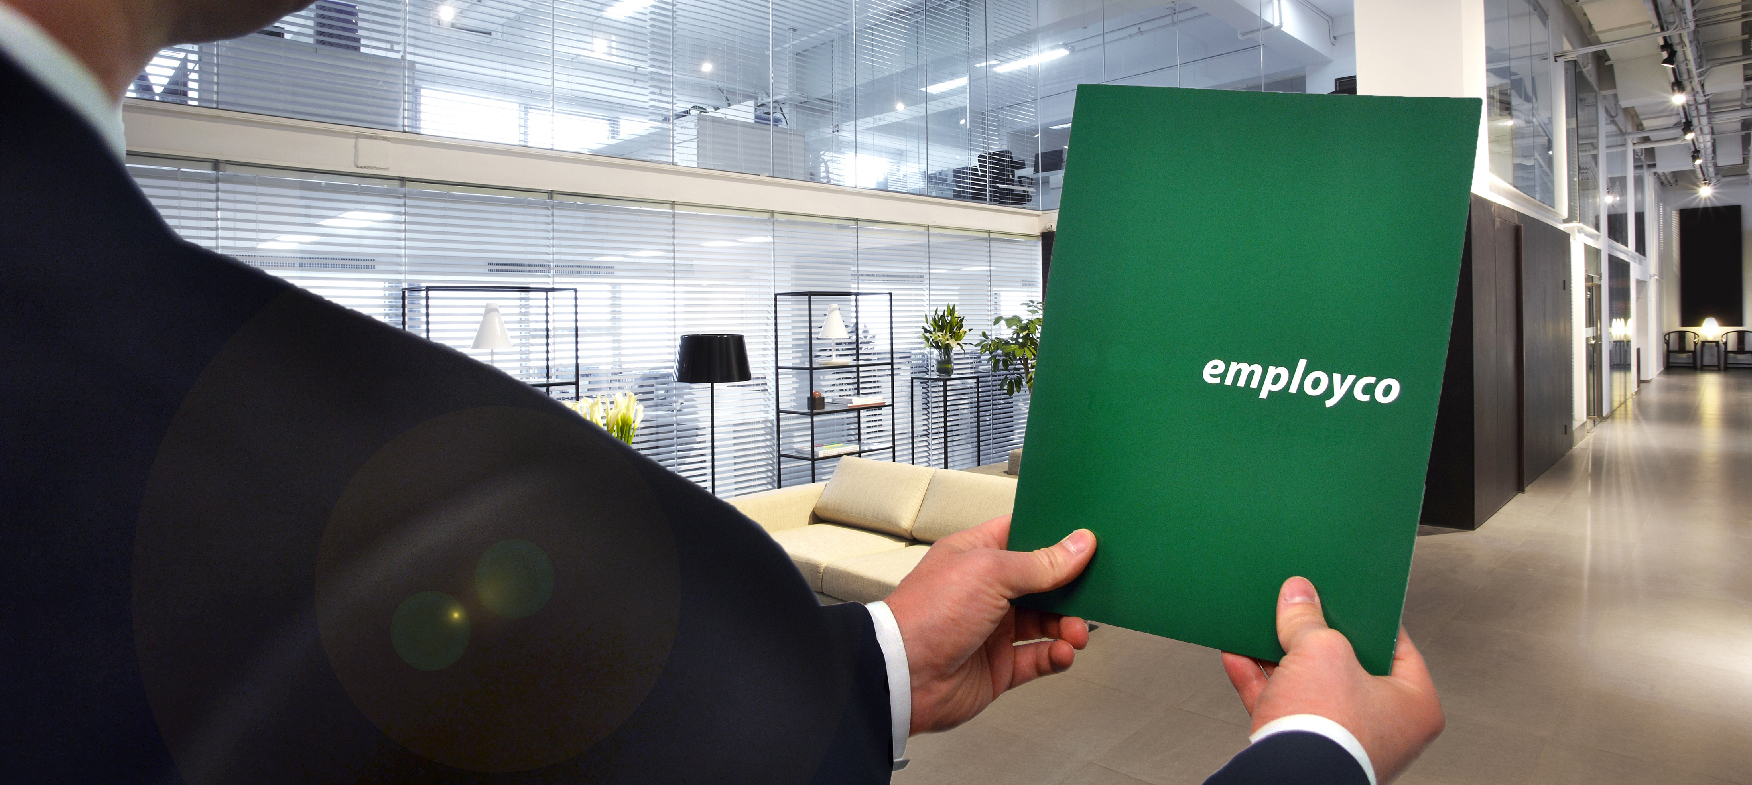 Shoulder shot of man in a suit holding out Employco folder.